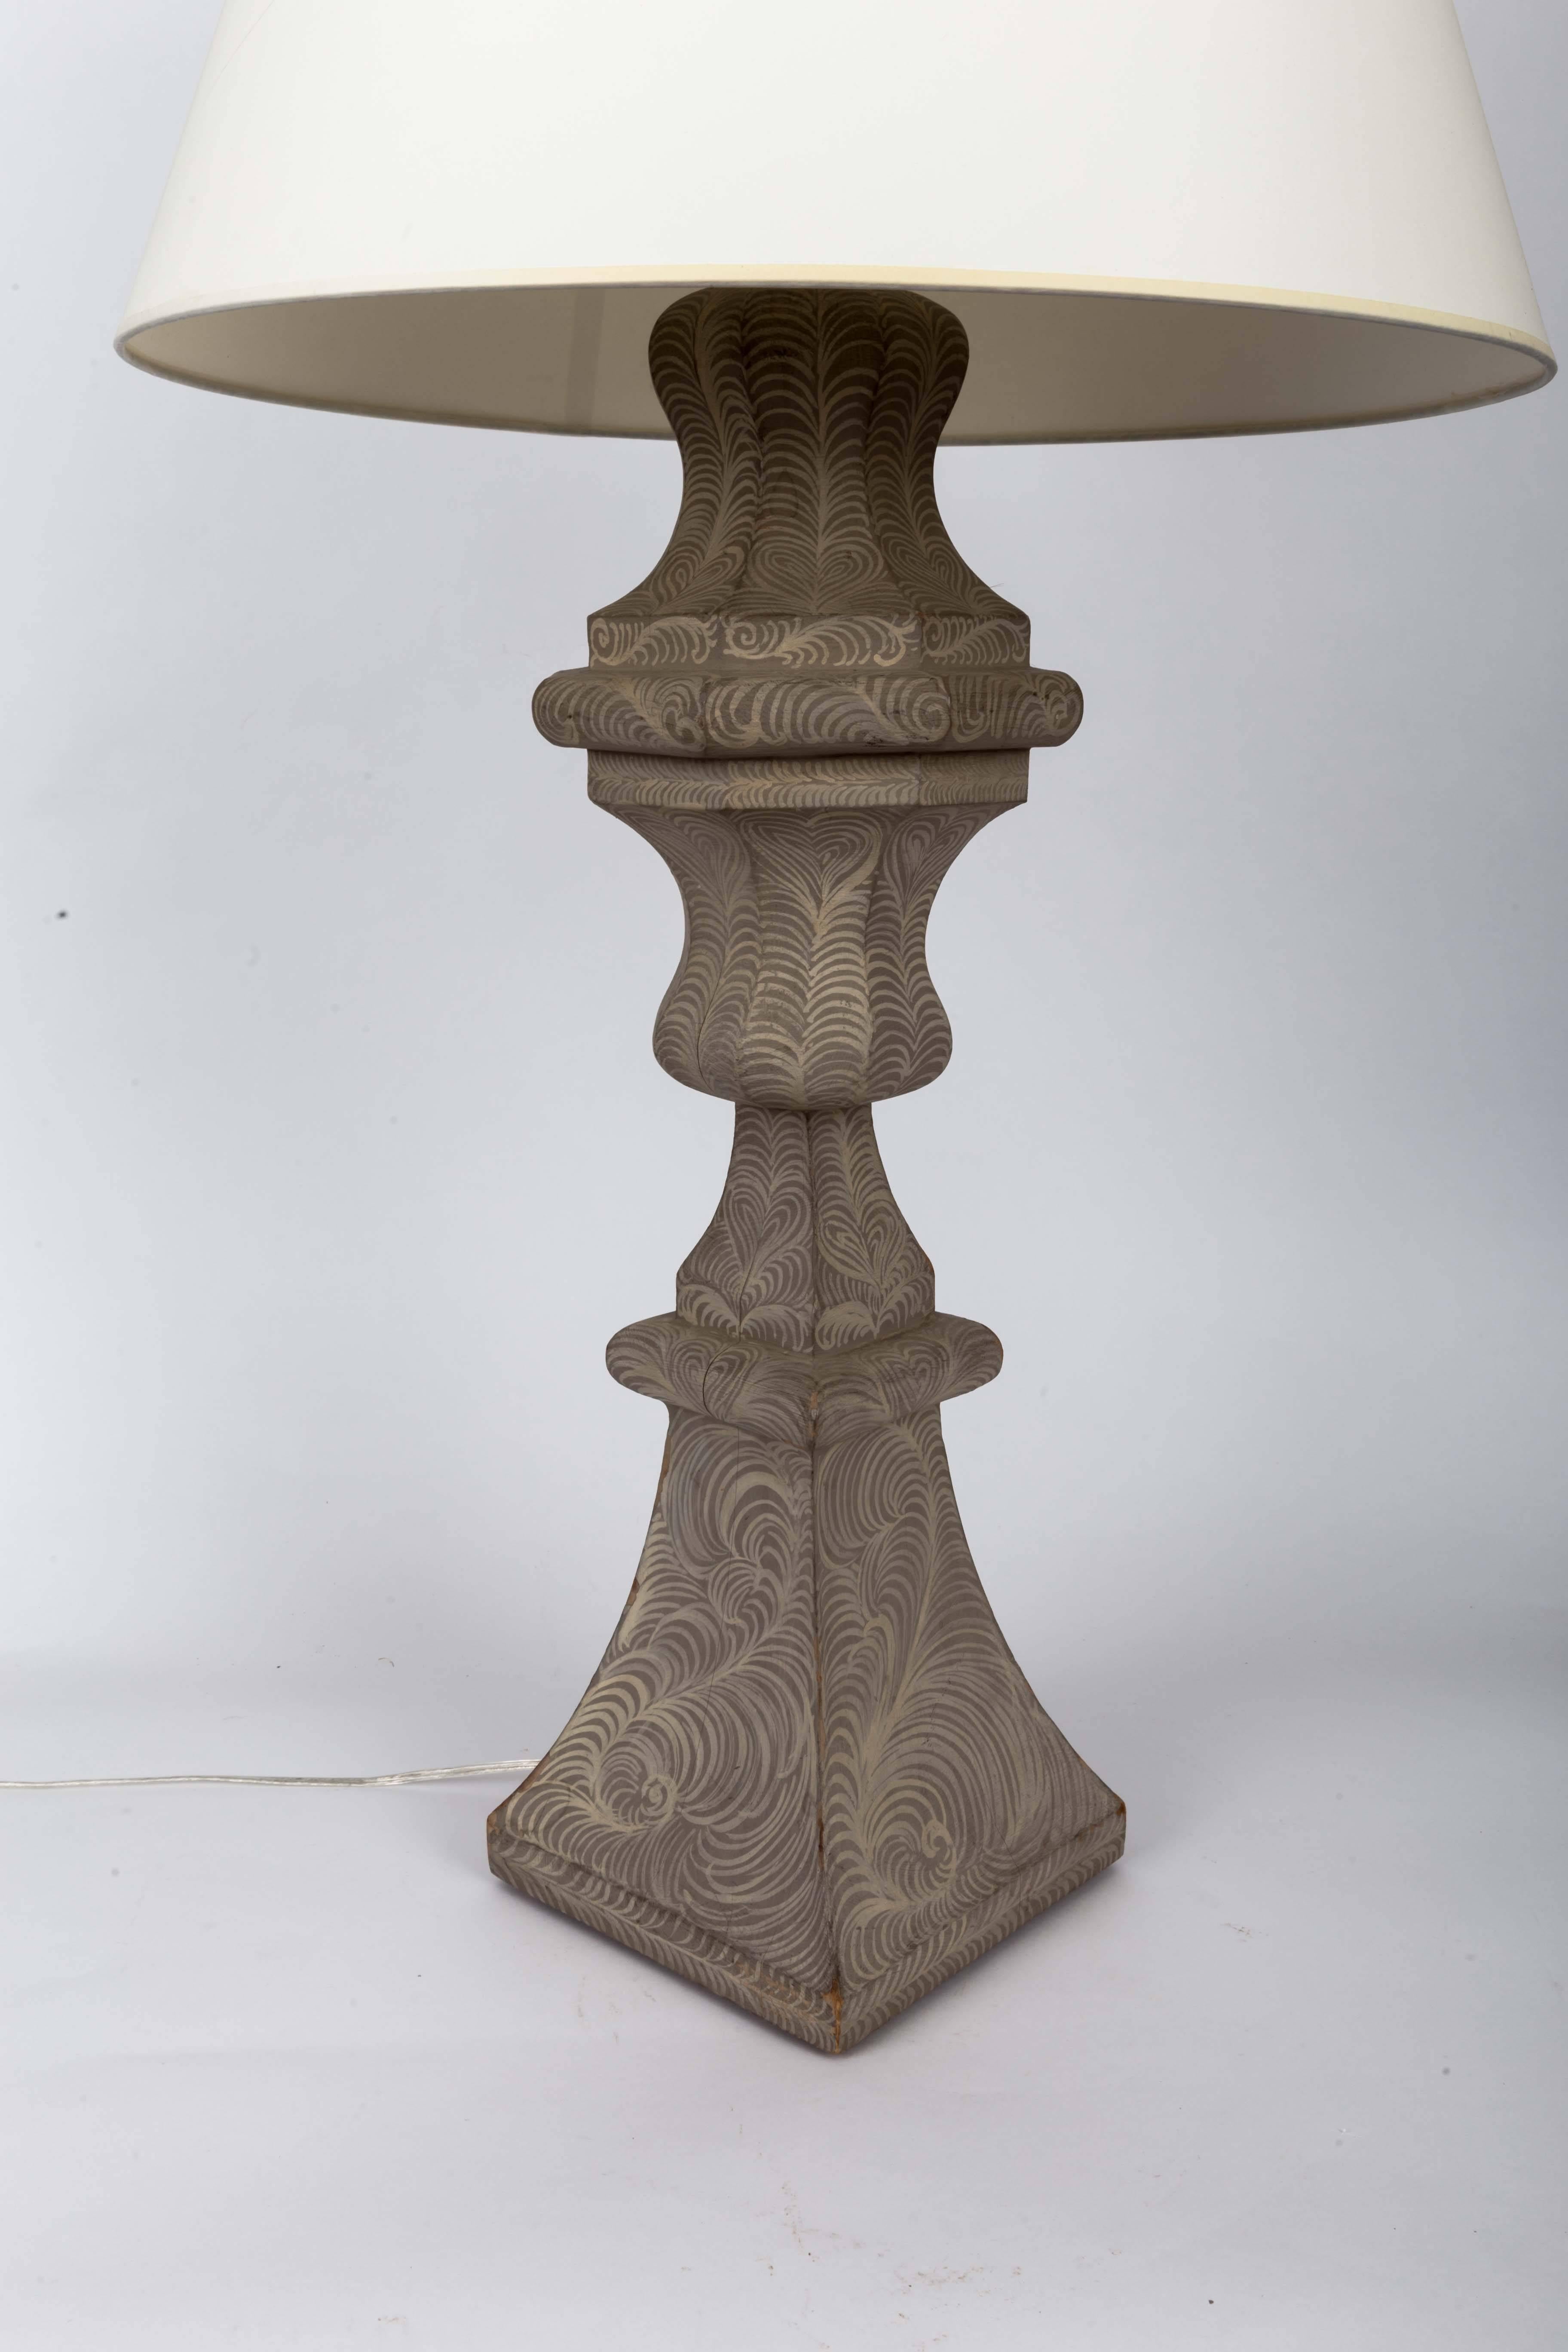 19th-century turned wood baluster with grey paint finish, electrified as a lamp.